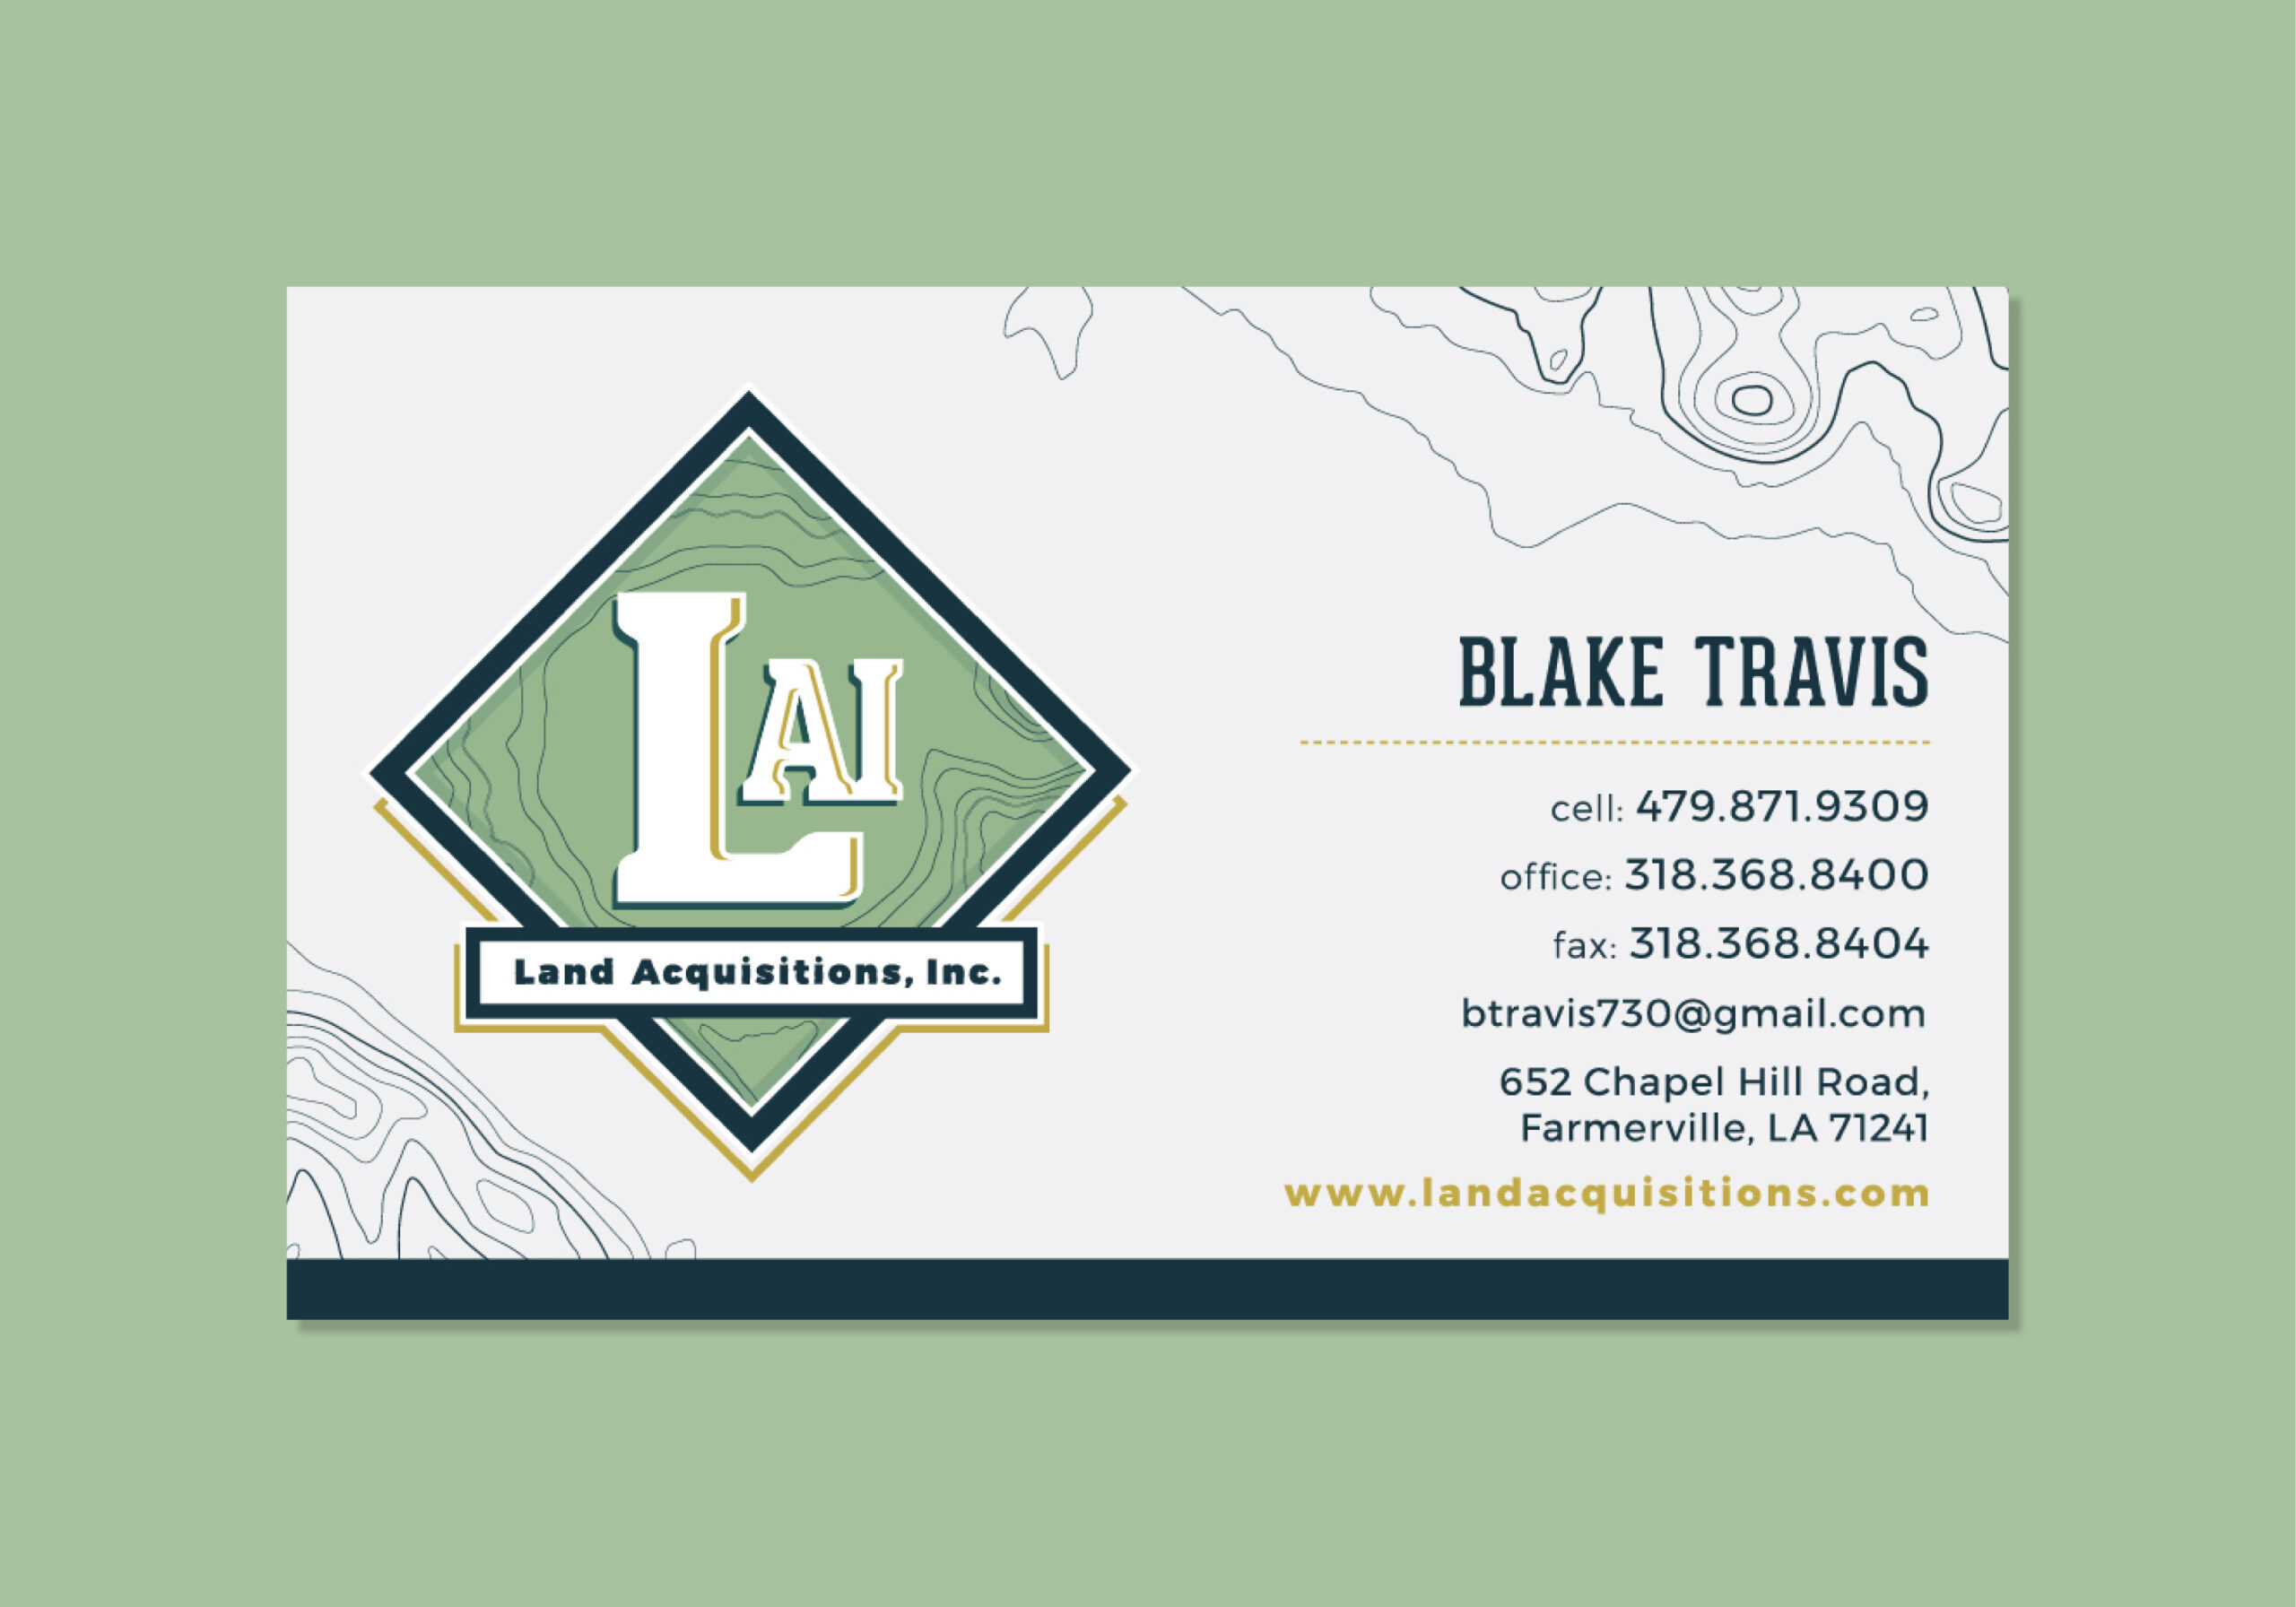 LandAcquisitions-business-card